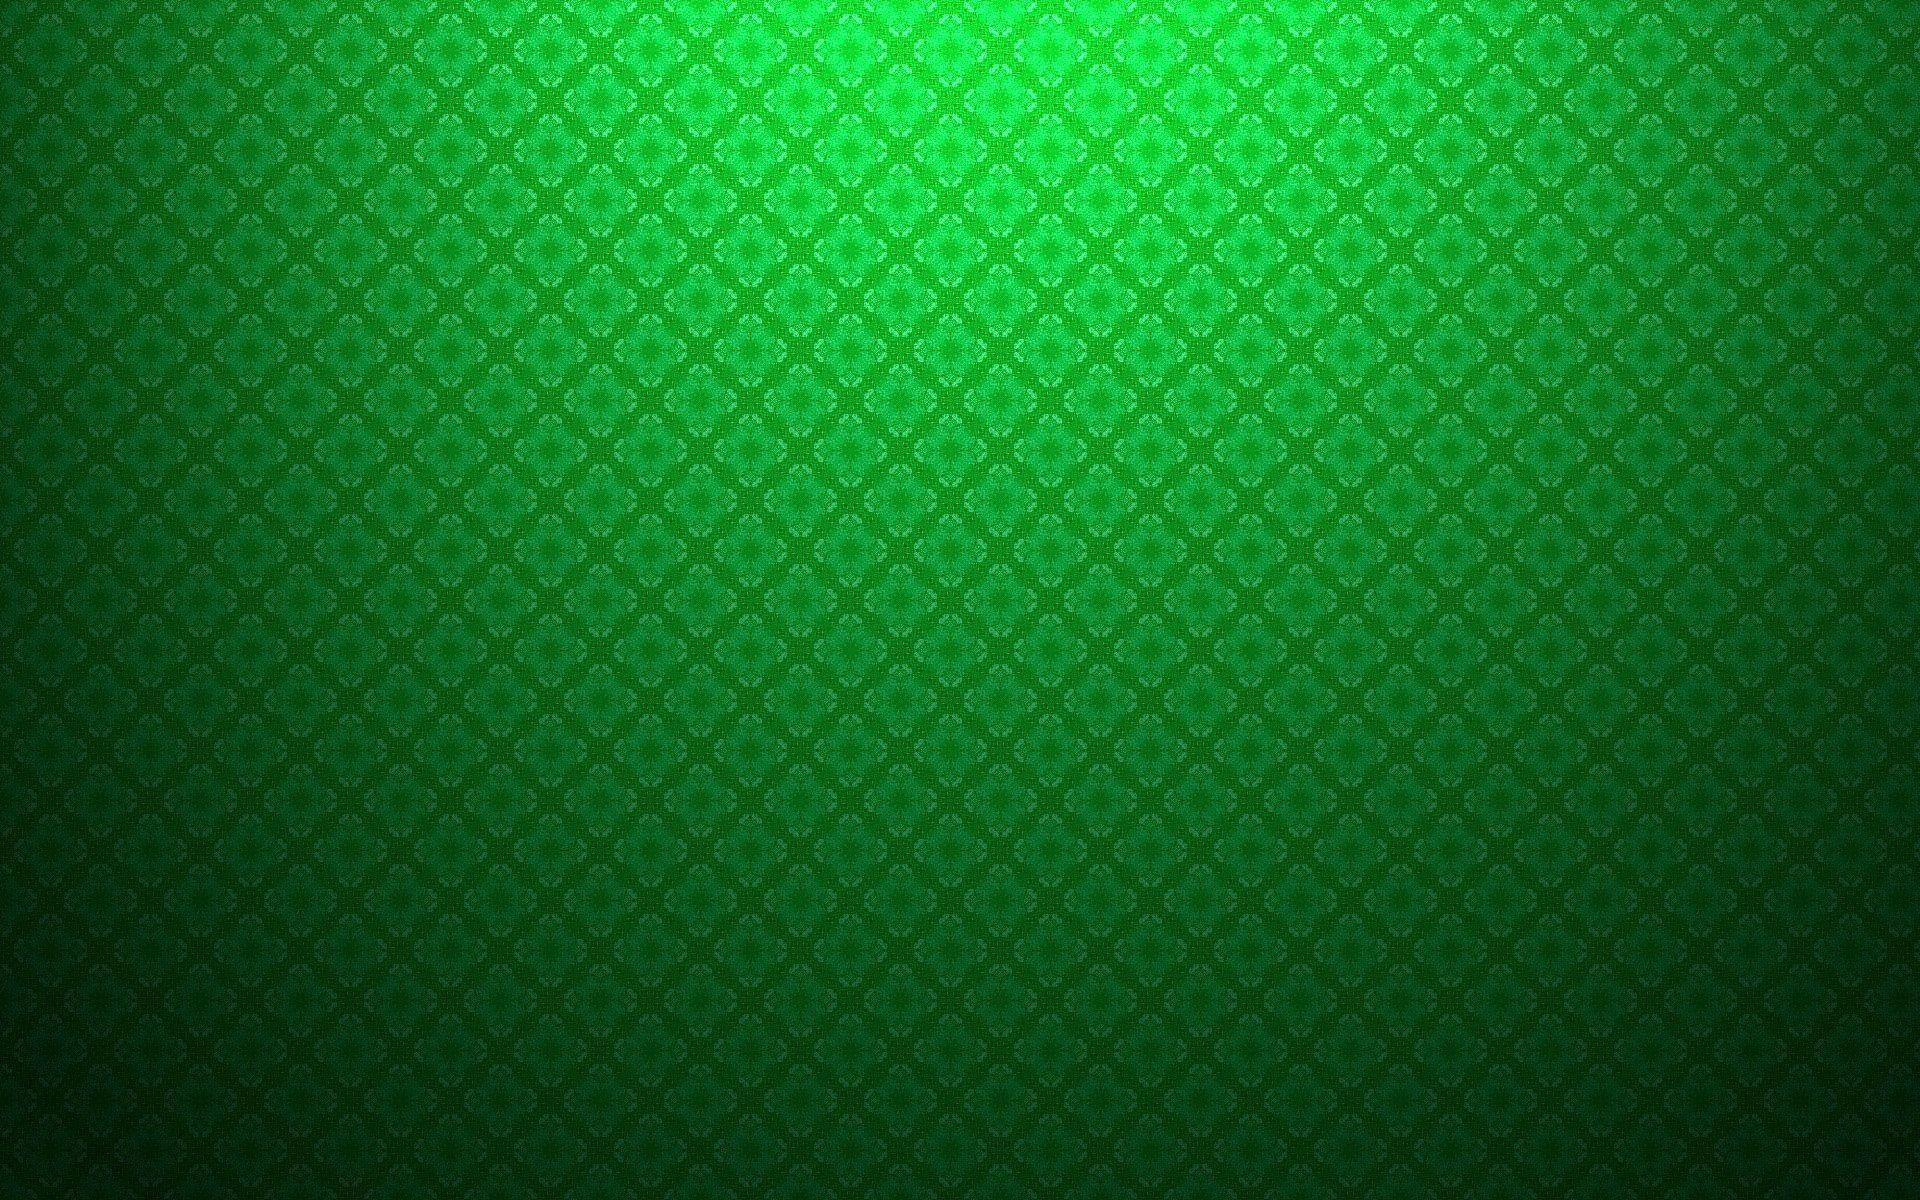 Green Background 21872 1920x1200 px